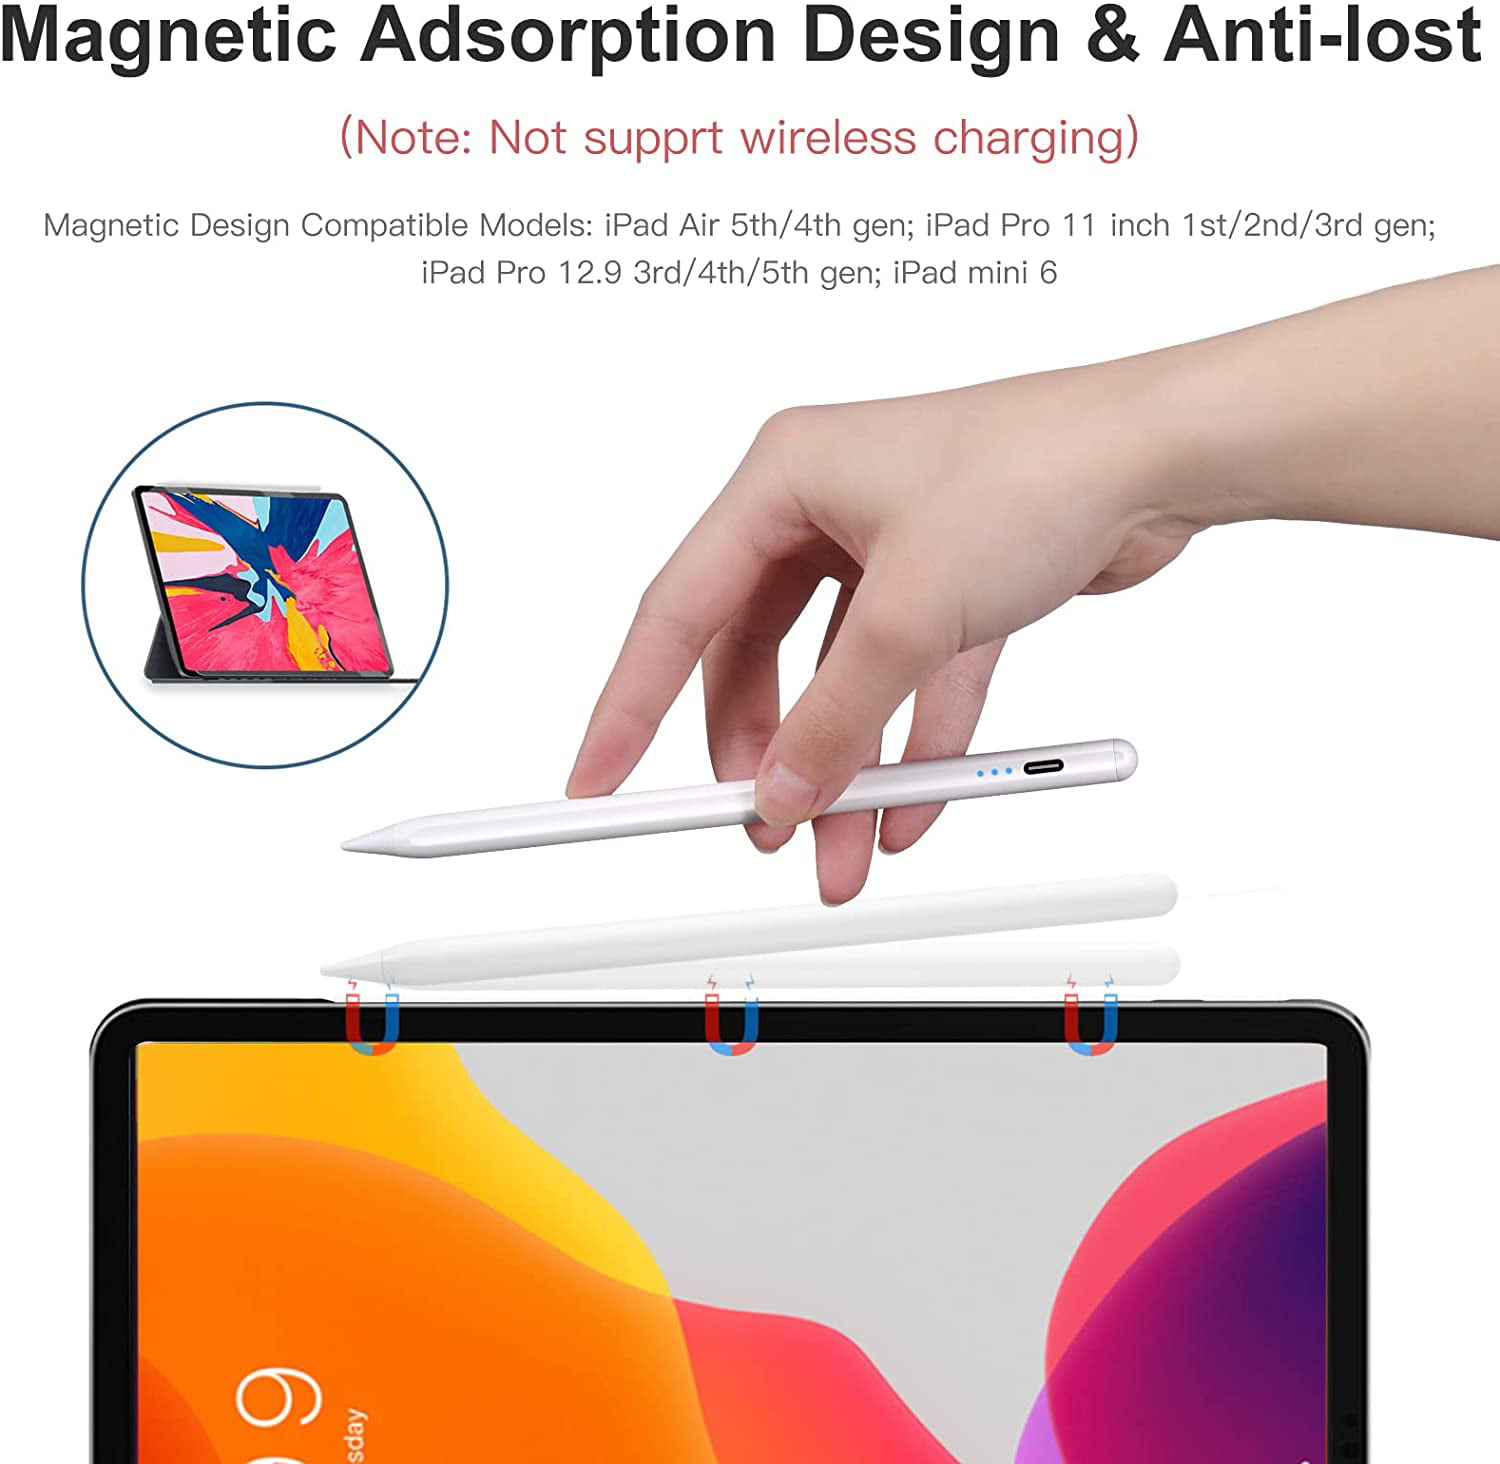 MoKo iPad Pencil 2nd Generation with Magnetic Wireless Charging,Apple  Pencil 2nd Generation,Stylus Pen for iPad Pro 12.9 in 6/5/4th,iPad Pro 11  in